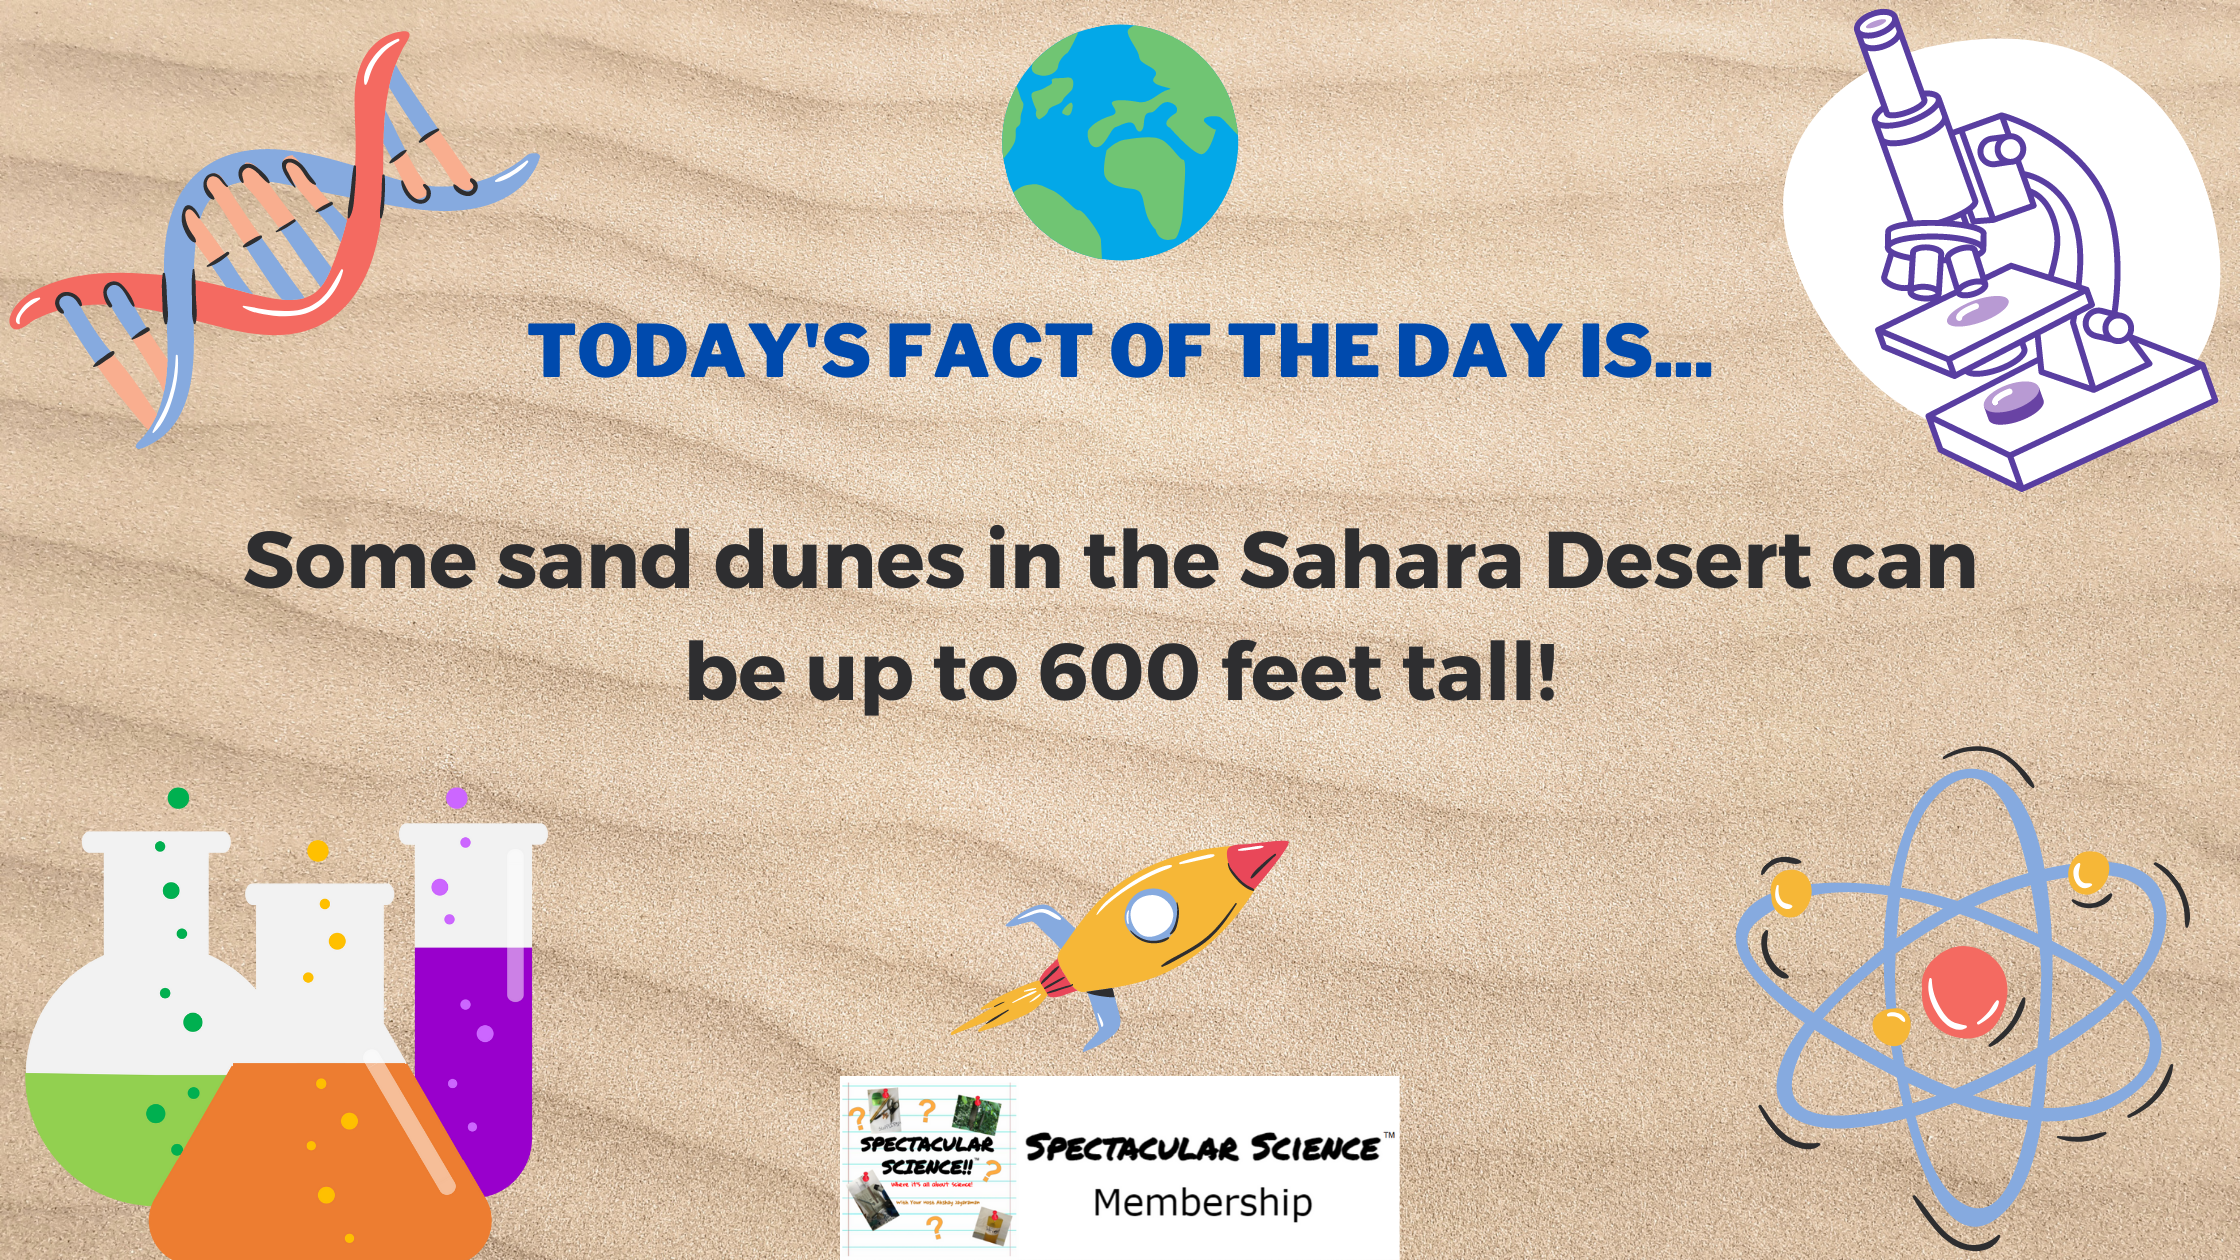 Fact of the Day Image May 22nd